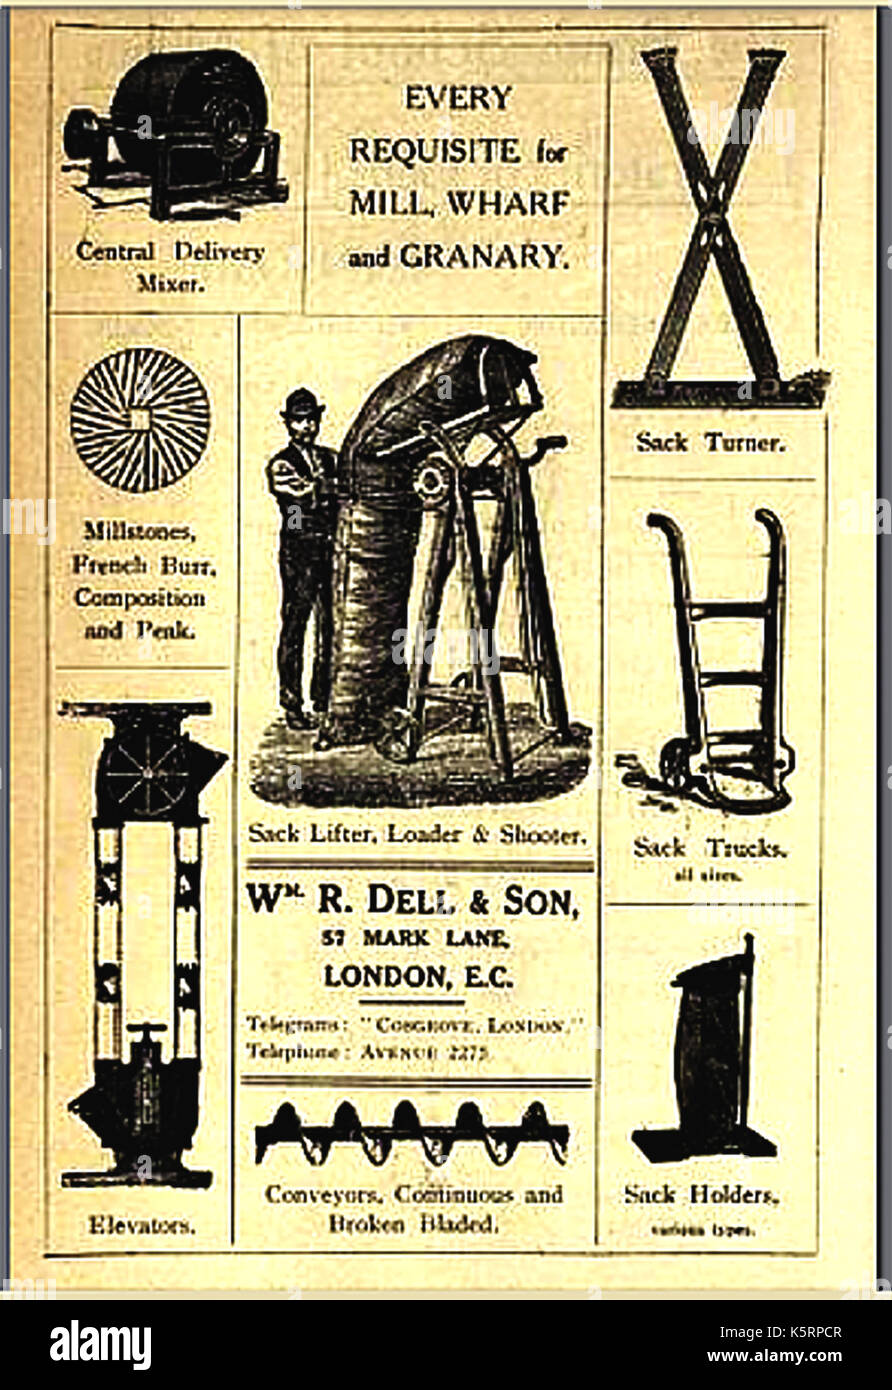 A page from an old millers catalogue of requisites for Mill, wharf and grain use - Central Delivery Mixer - Sack Turner -  Millstones (French burr, composition and peak) - Sack lifter, loader and shooter -  Sack Truck (sack barrow) -  Sack holder - Elevator and Conveyors. - William Dell and son, 57 Mark Lane, London. Stock Photo